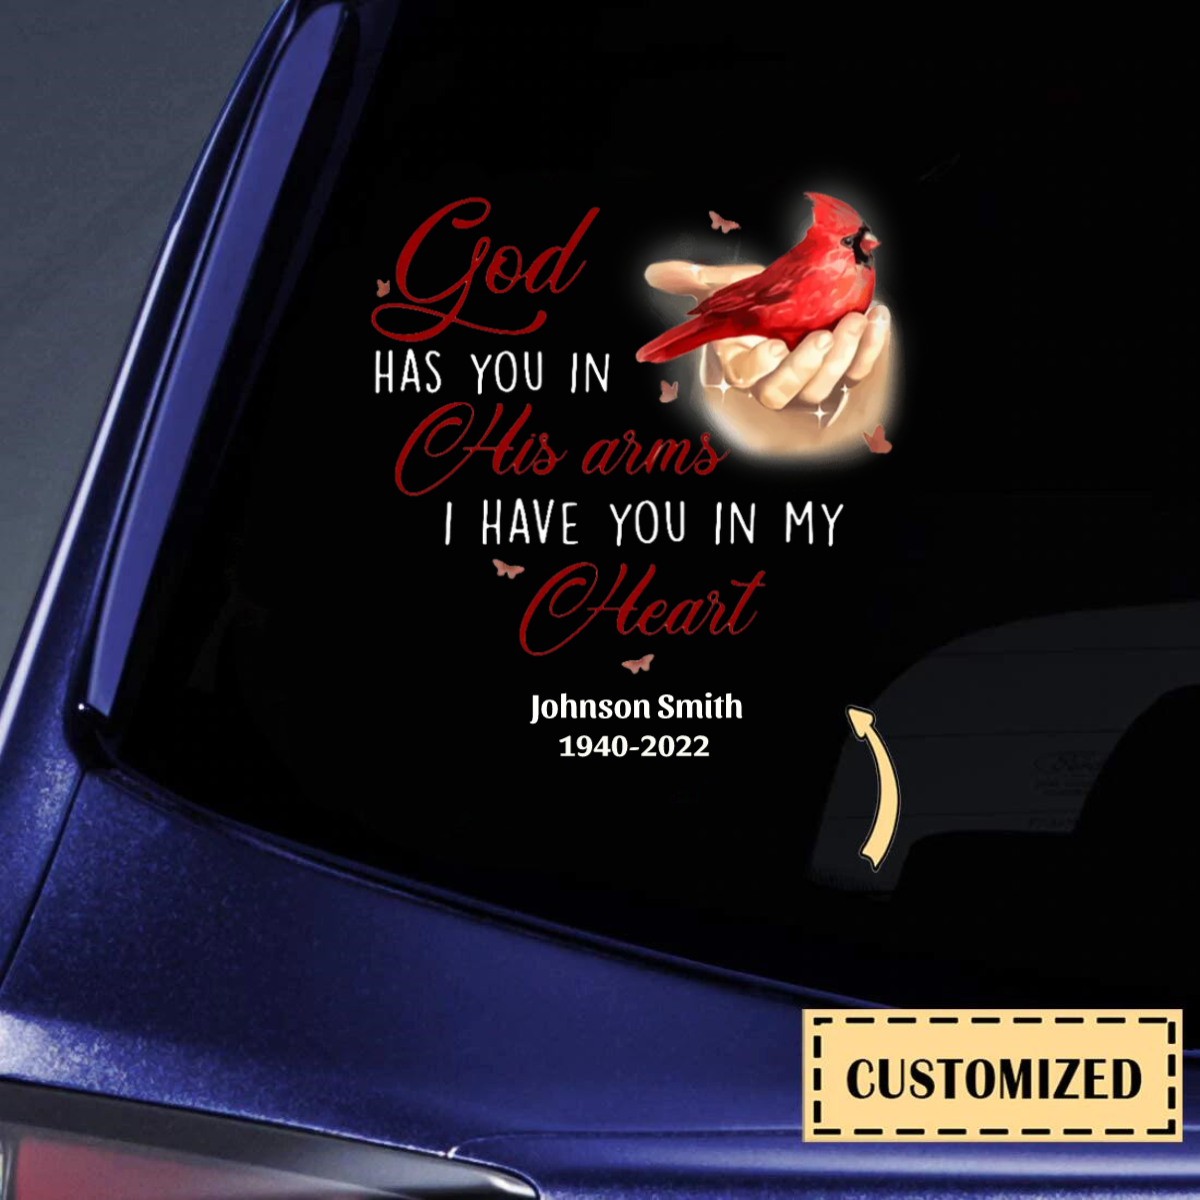 I Have You In My Heart Personalized Car Decal